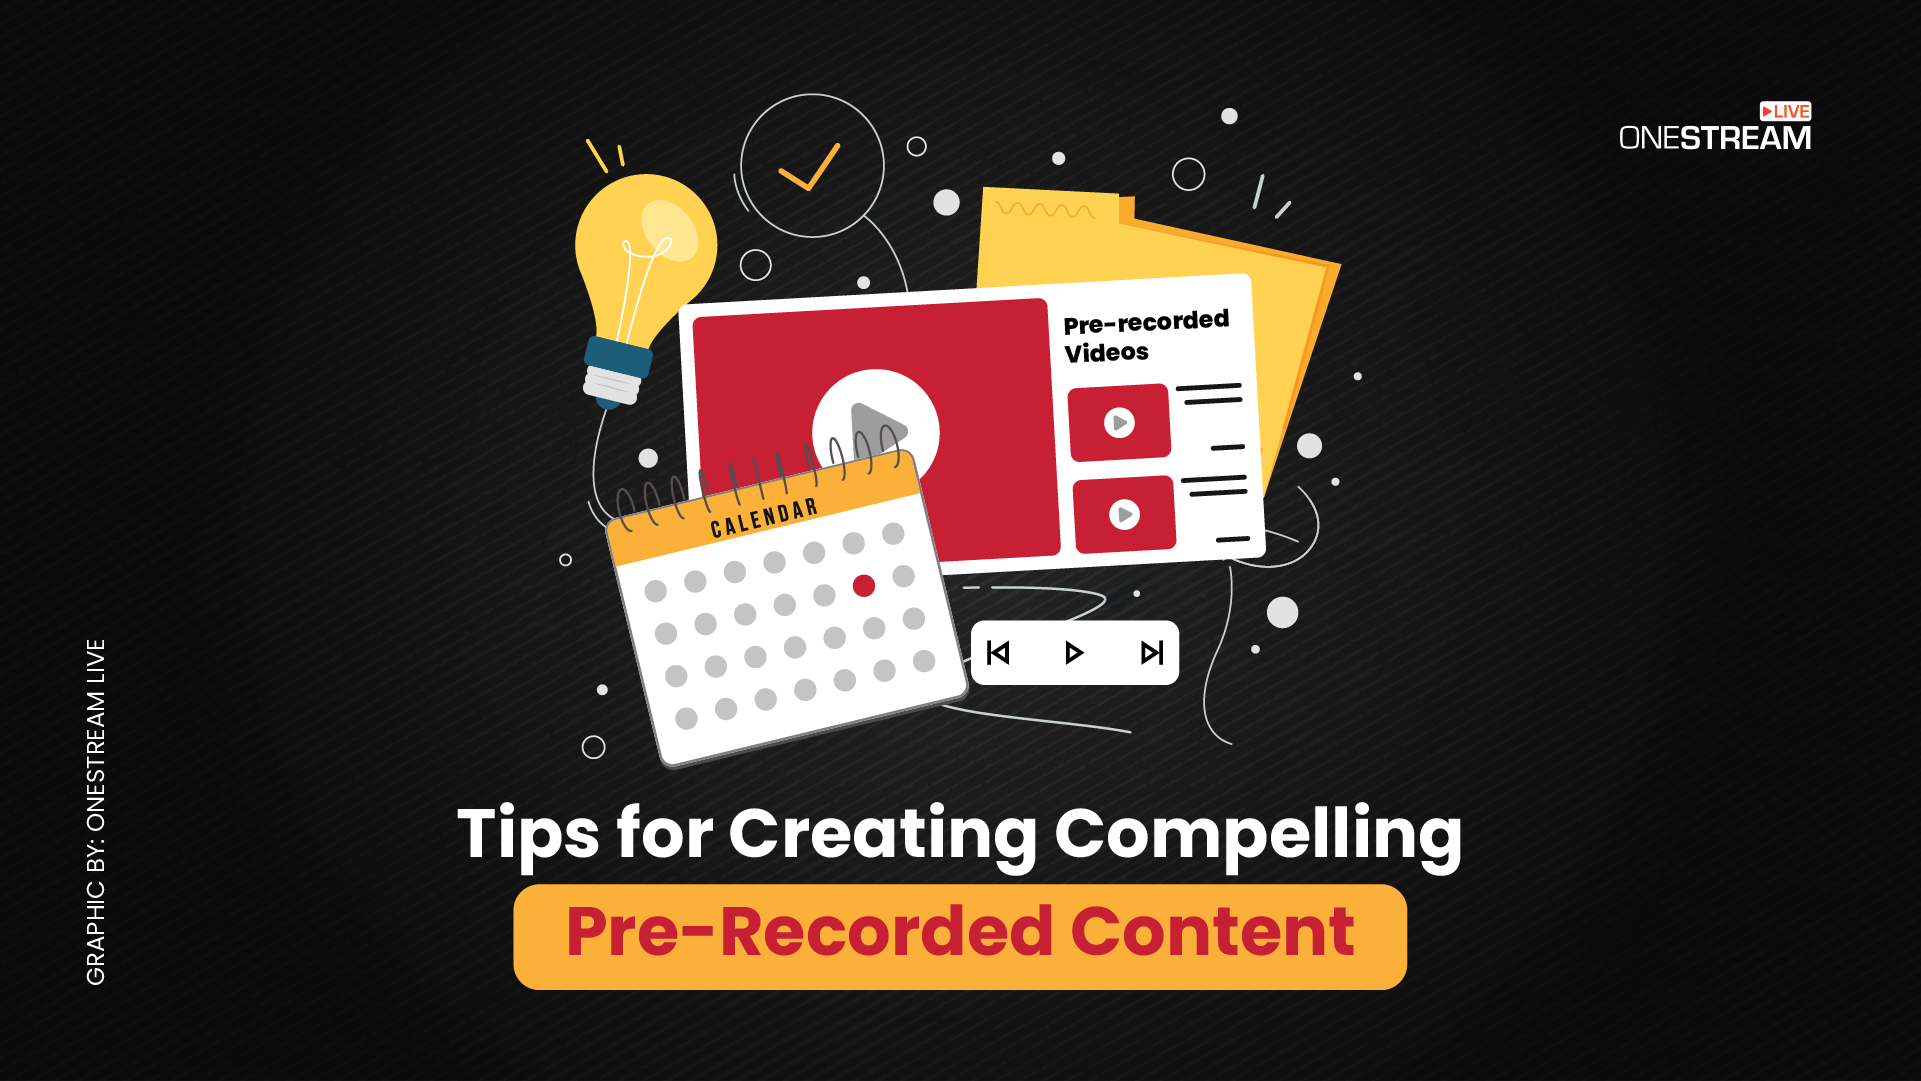 Tips for creating pre-recorded videos